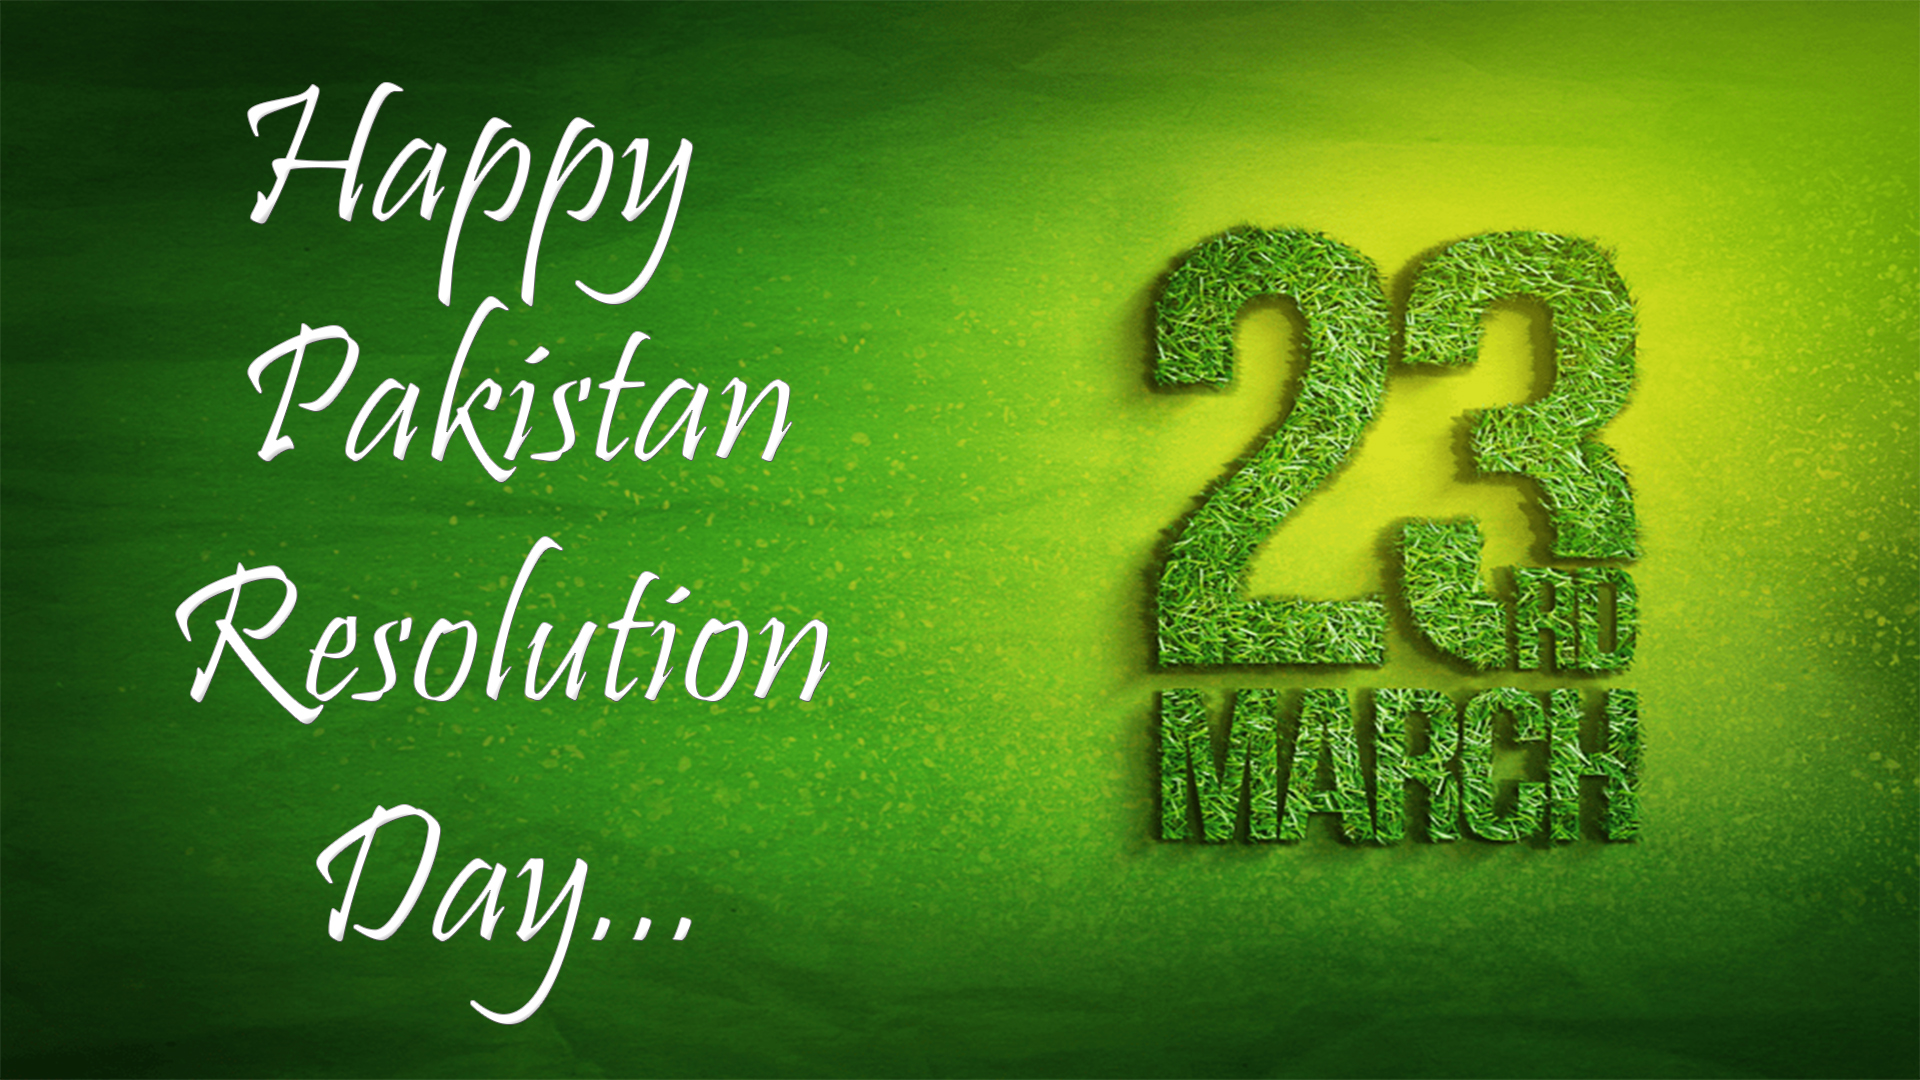 pakistan day images 2019